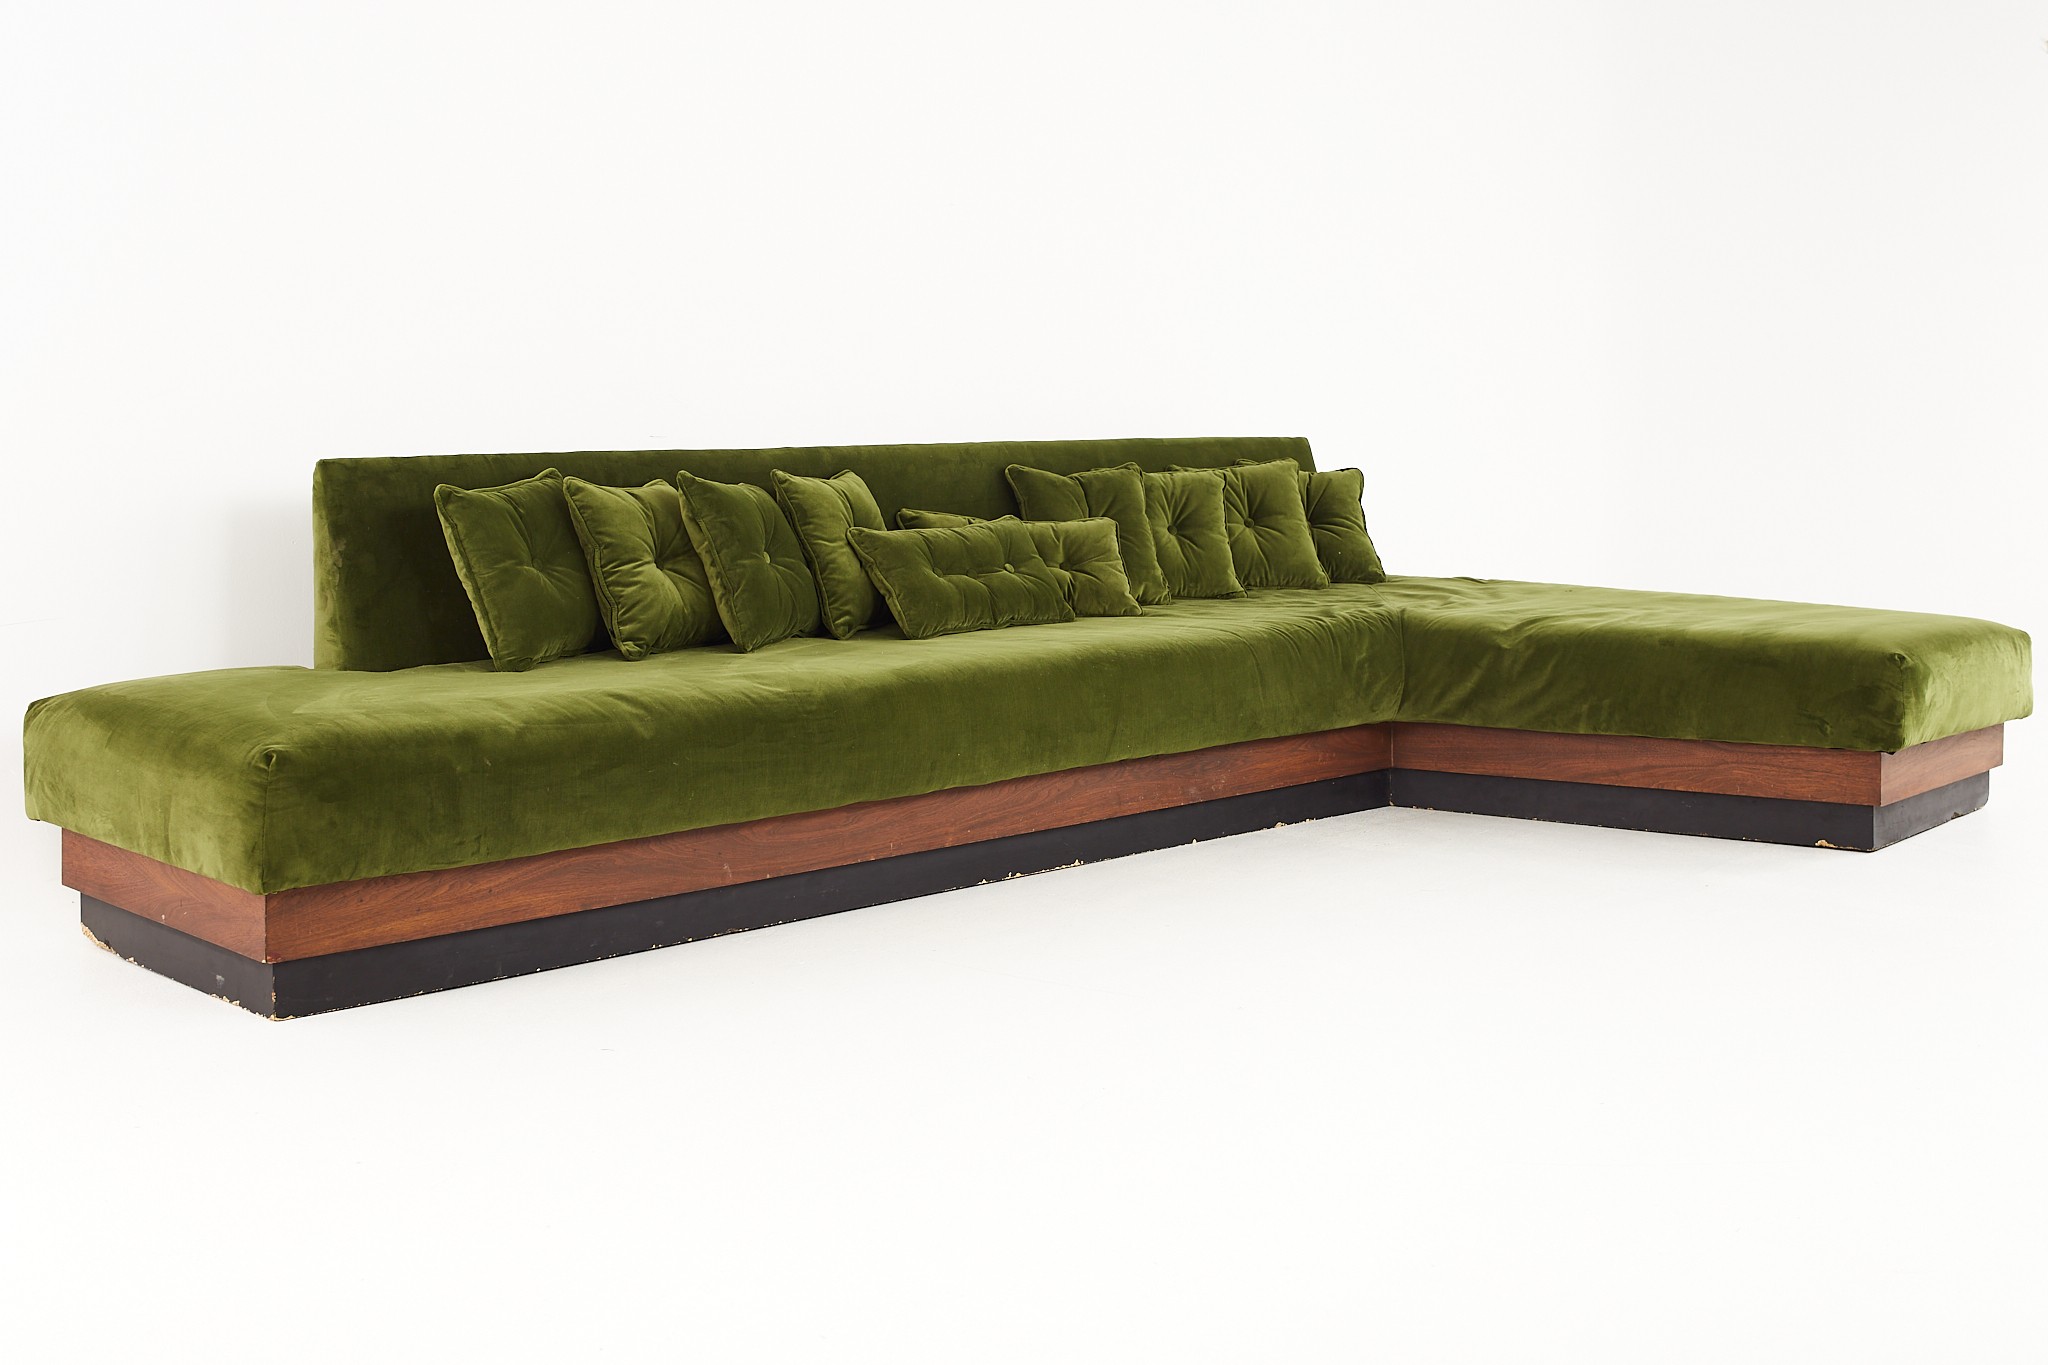 Adrian Pearsall Mid Century Green Sectional Sofa